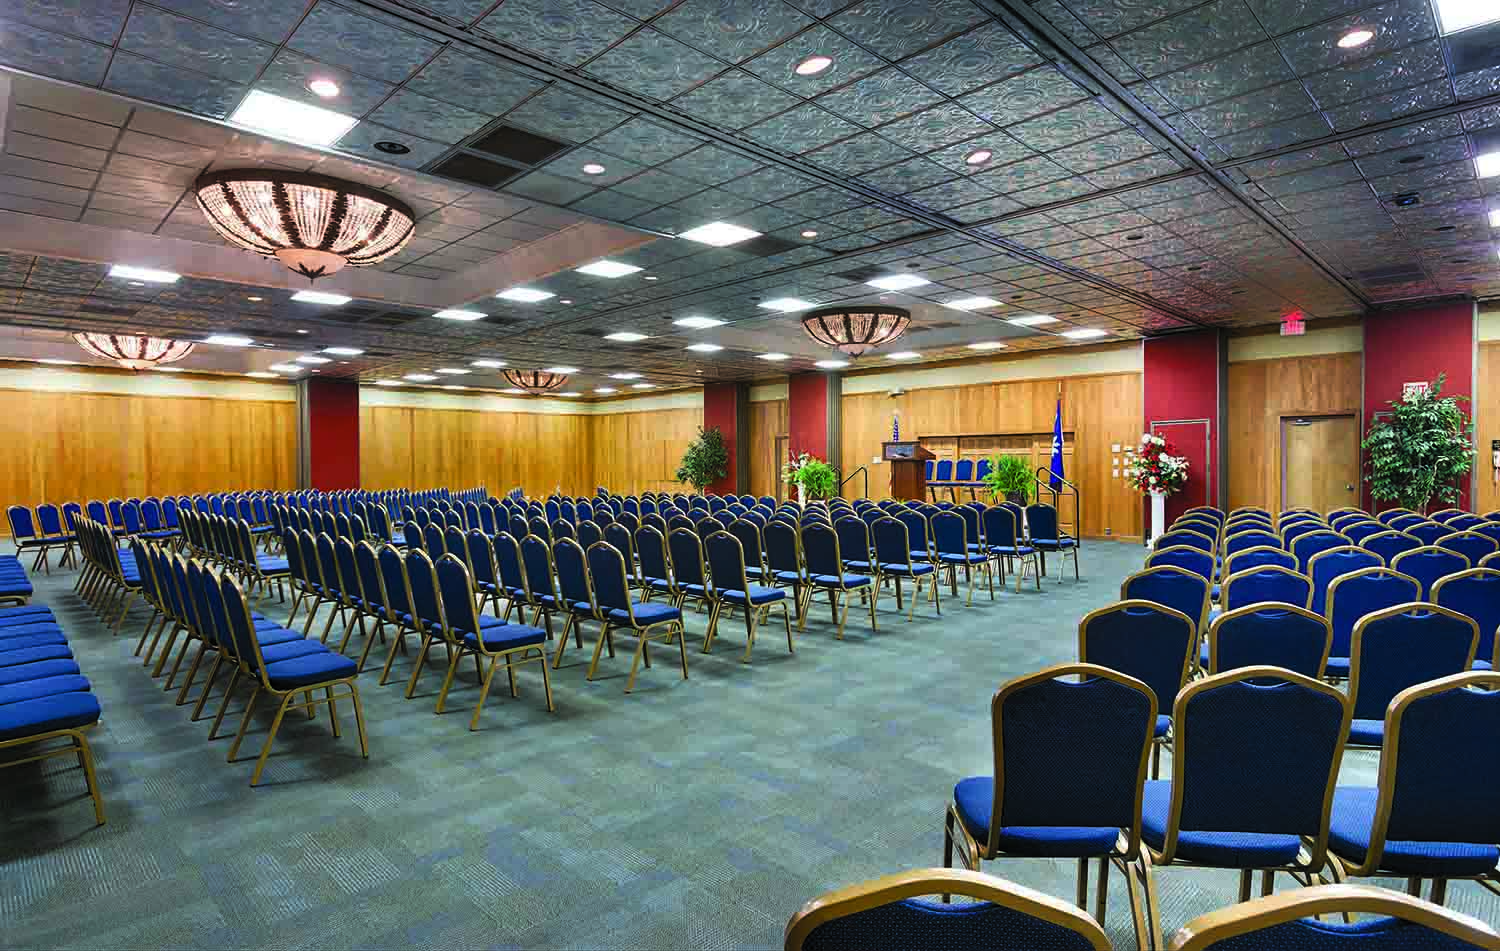 Plan Your Group Meeting or Event at Sands Resorts